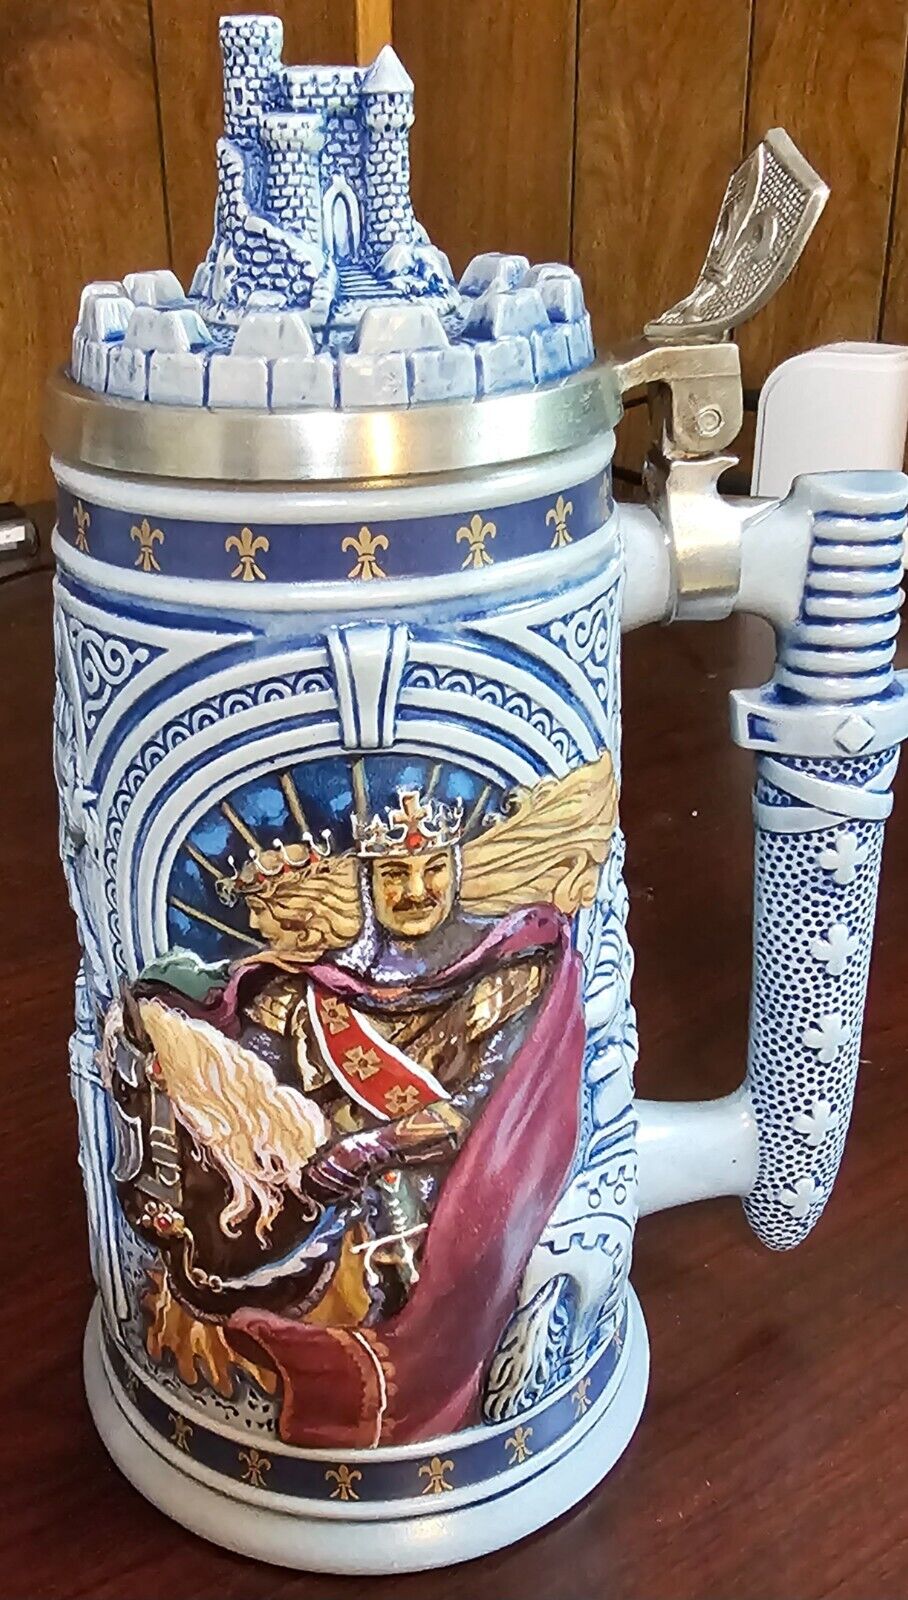 1995 Avon “Knights of the Realm” Vintage Lidded Beer Stein King Arthur Camelot